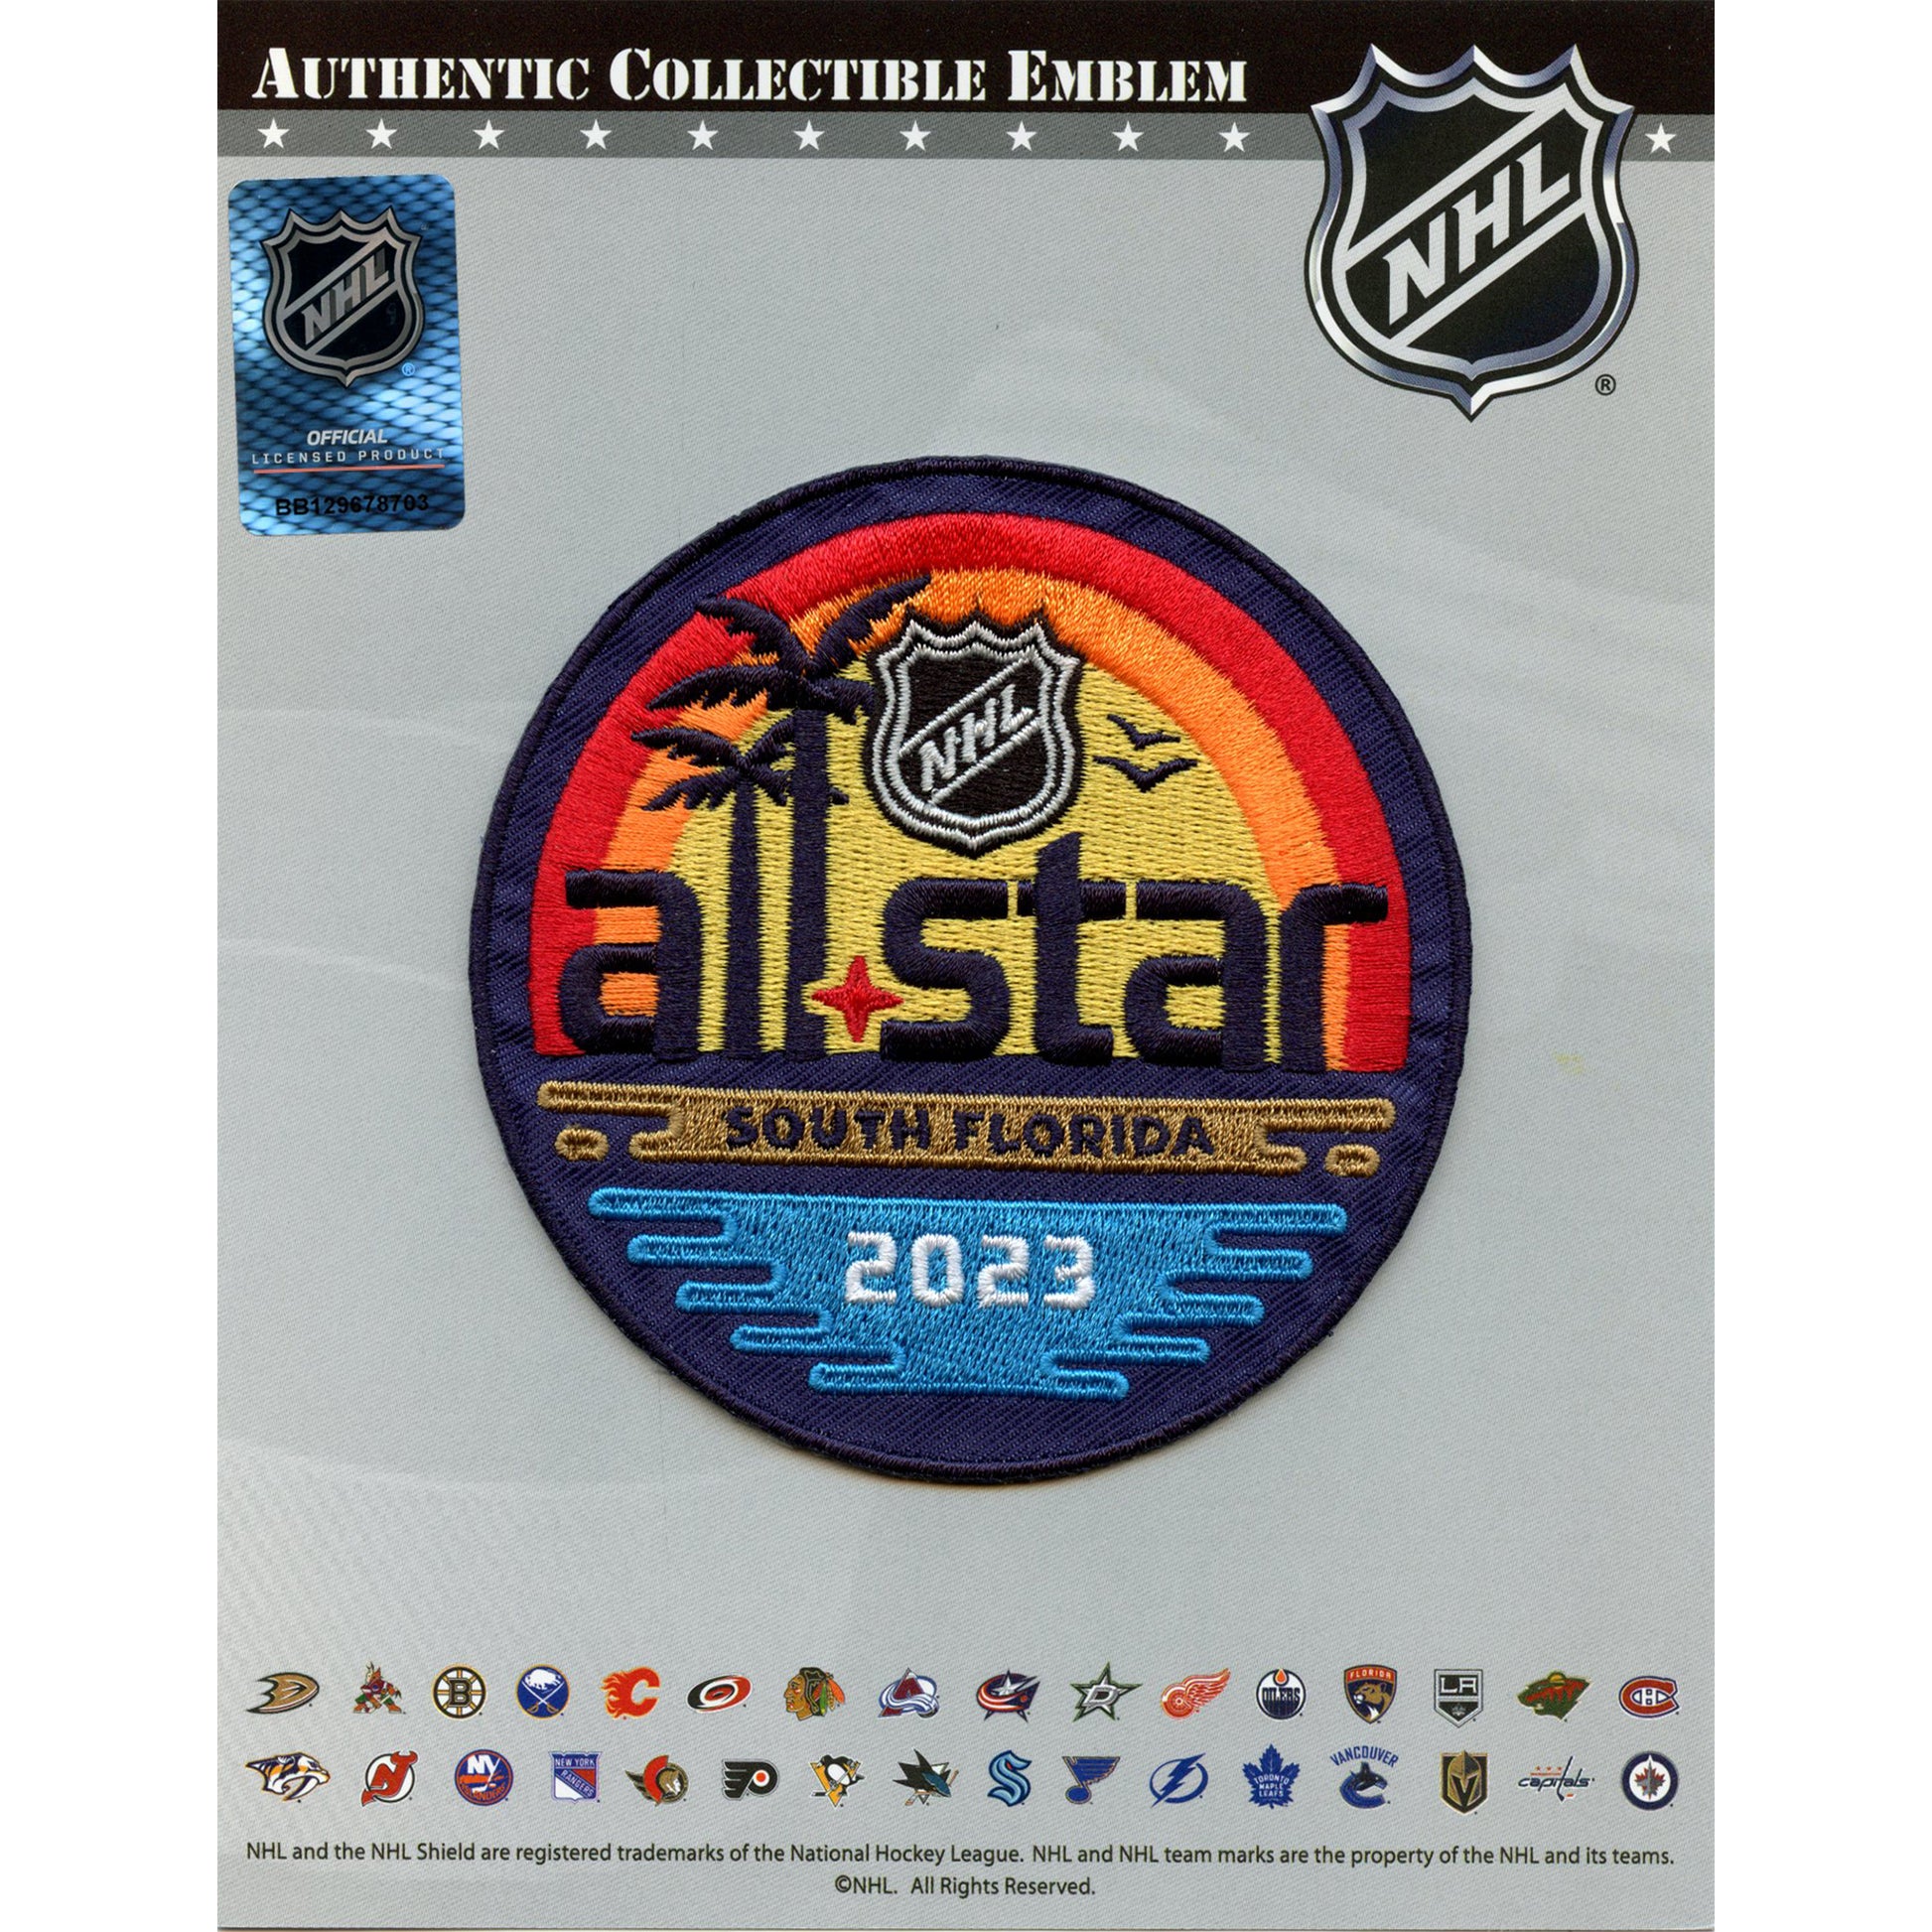 Youth 2023 NHL All-Star Game Western Conference Premier Jersey - White